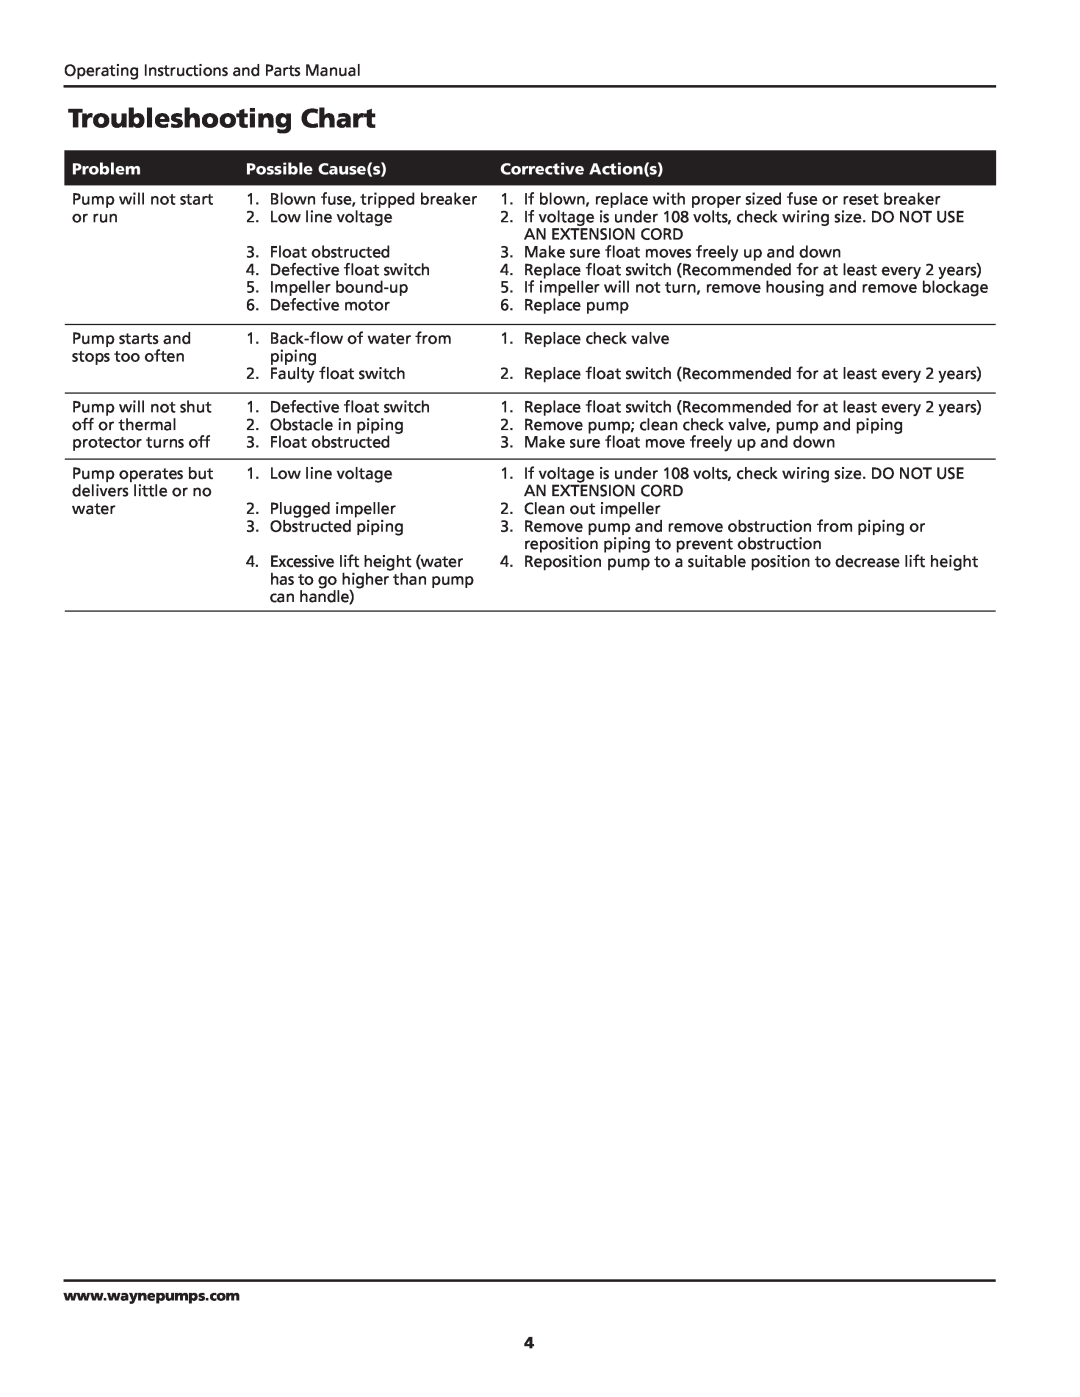 Wayne SYLT30 warranty Troubleshooting Chart, Problem, Possible Causes, Corrective Actions 